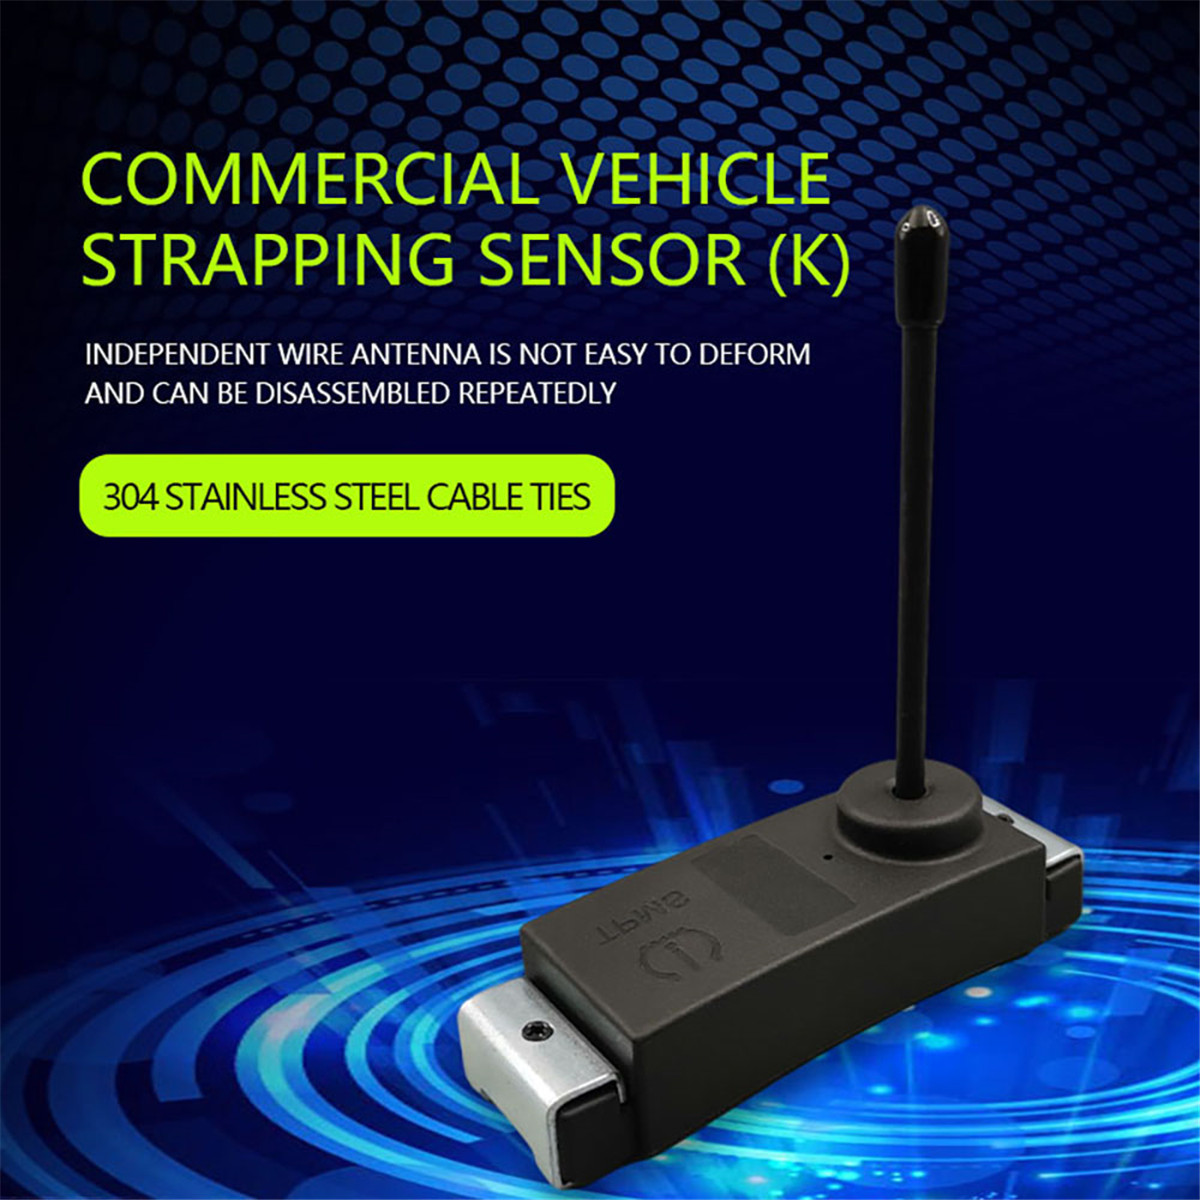 Commercial vehicle strapping sensor01 (9)